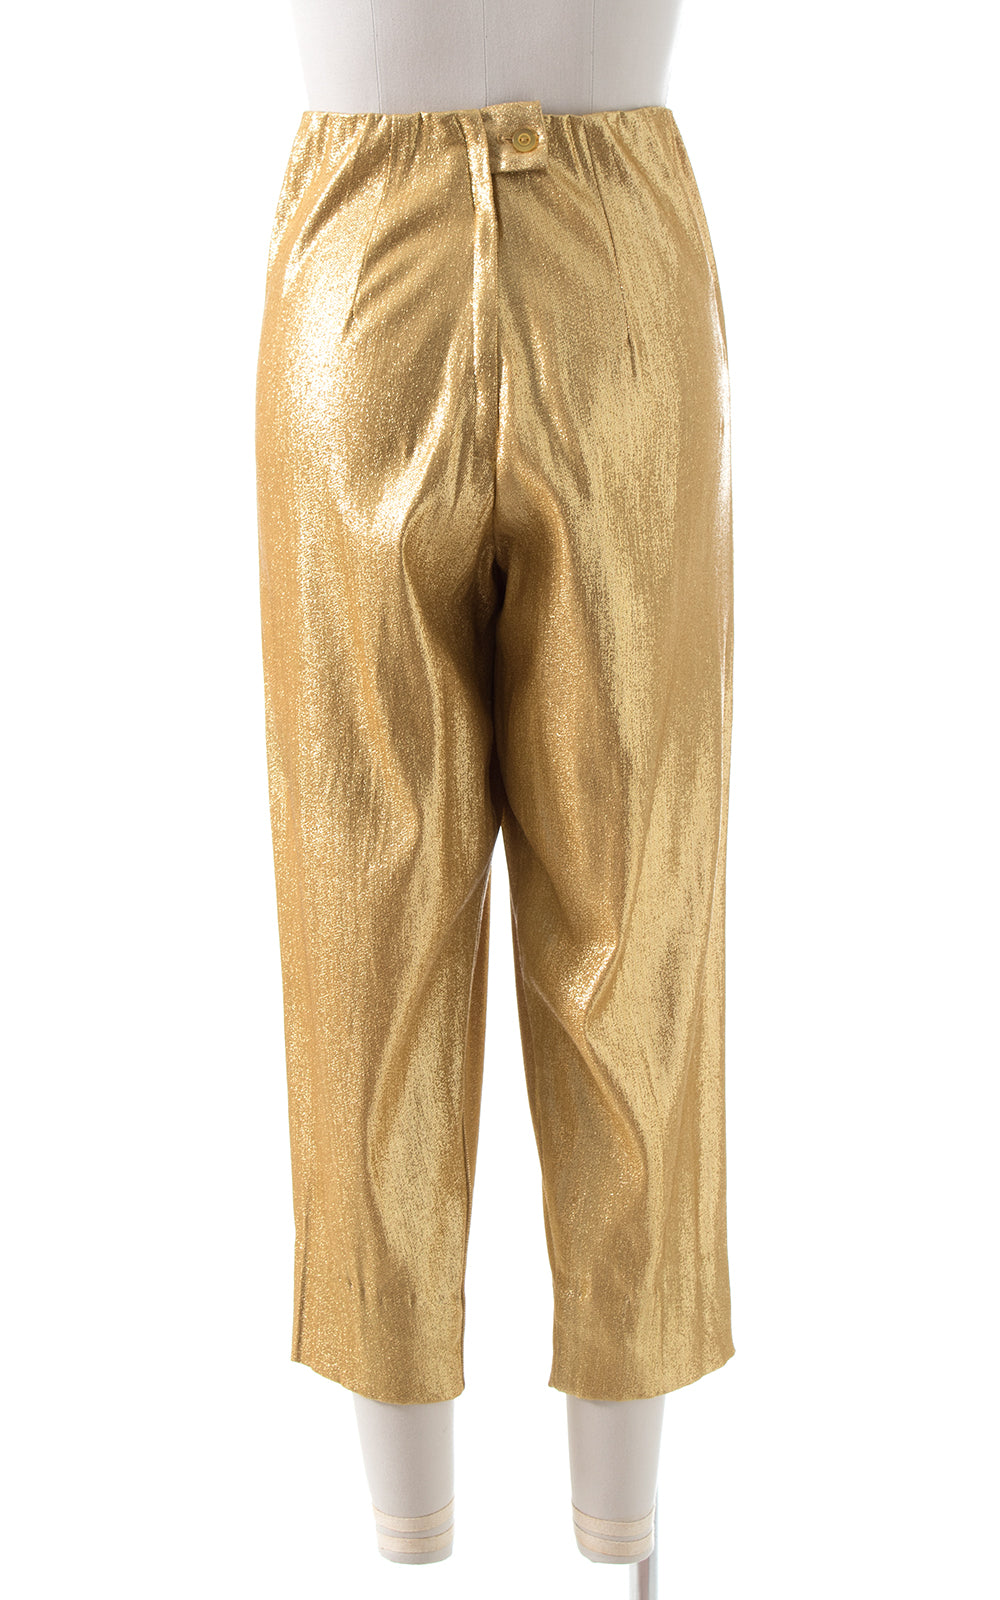 Ladies Golden Silk Pant at 224.00 INR in New Delhi | Gold India Exports